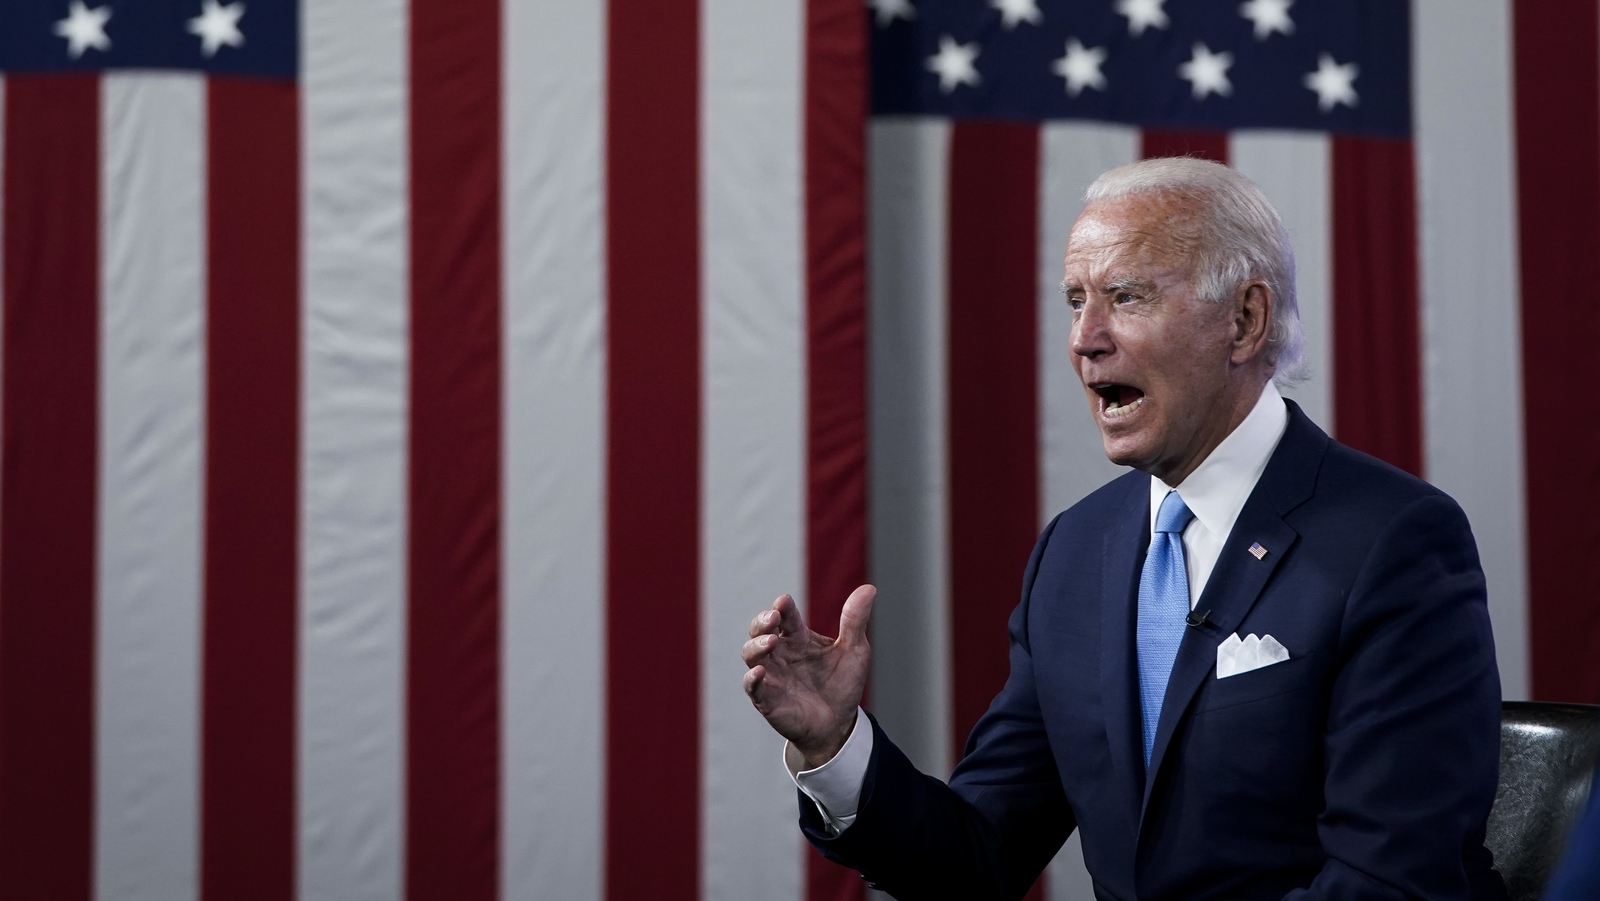 What will Joe Biden's presidency mean for US immigration policy?